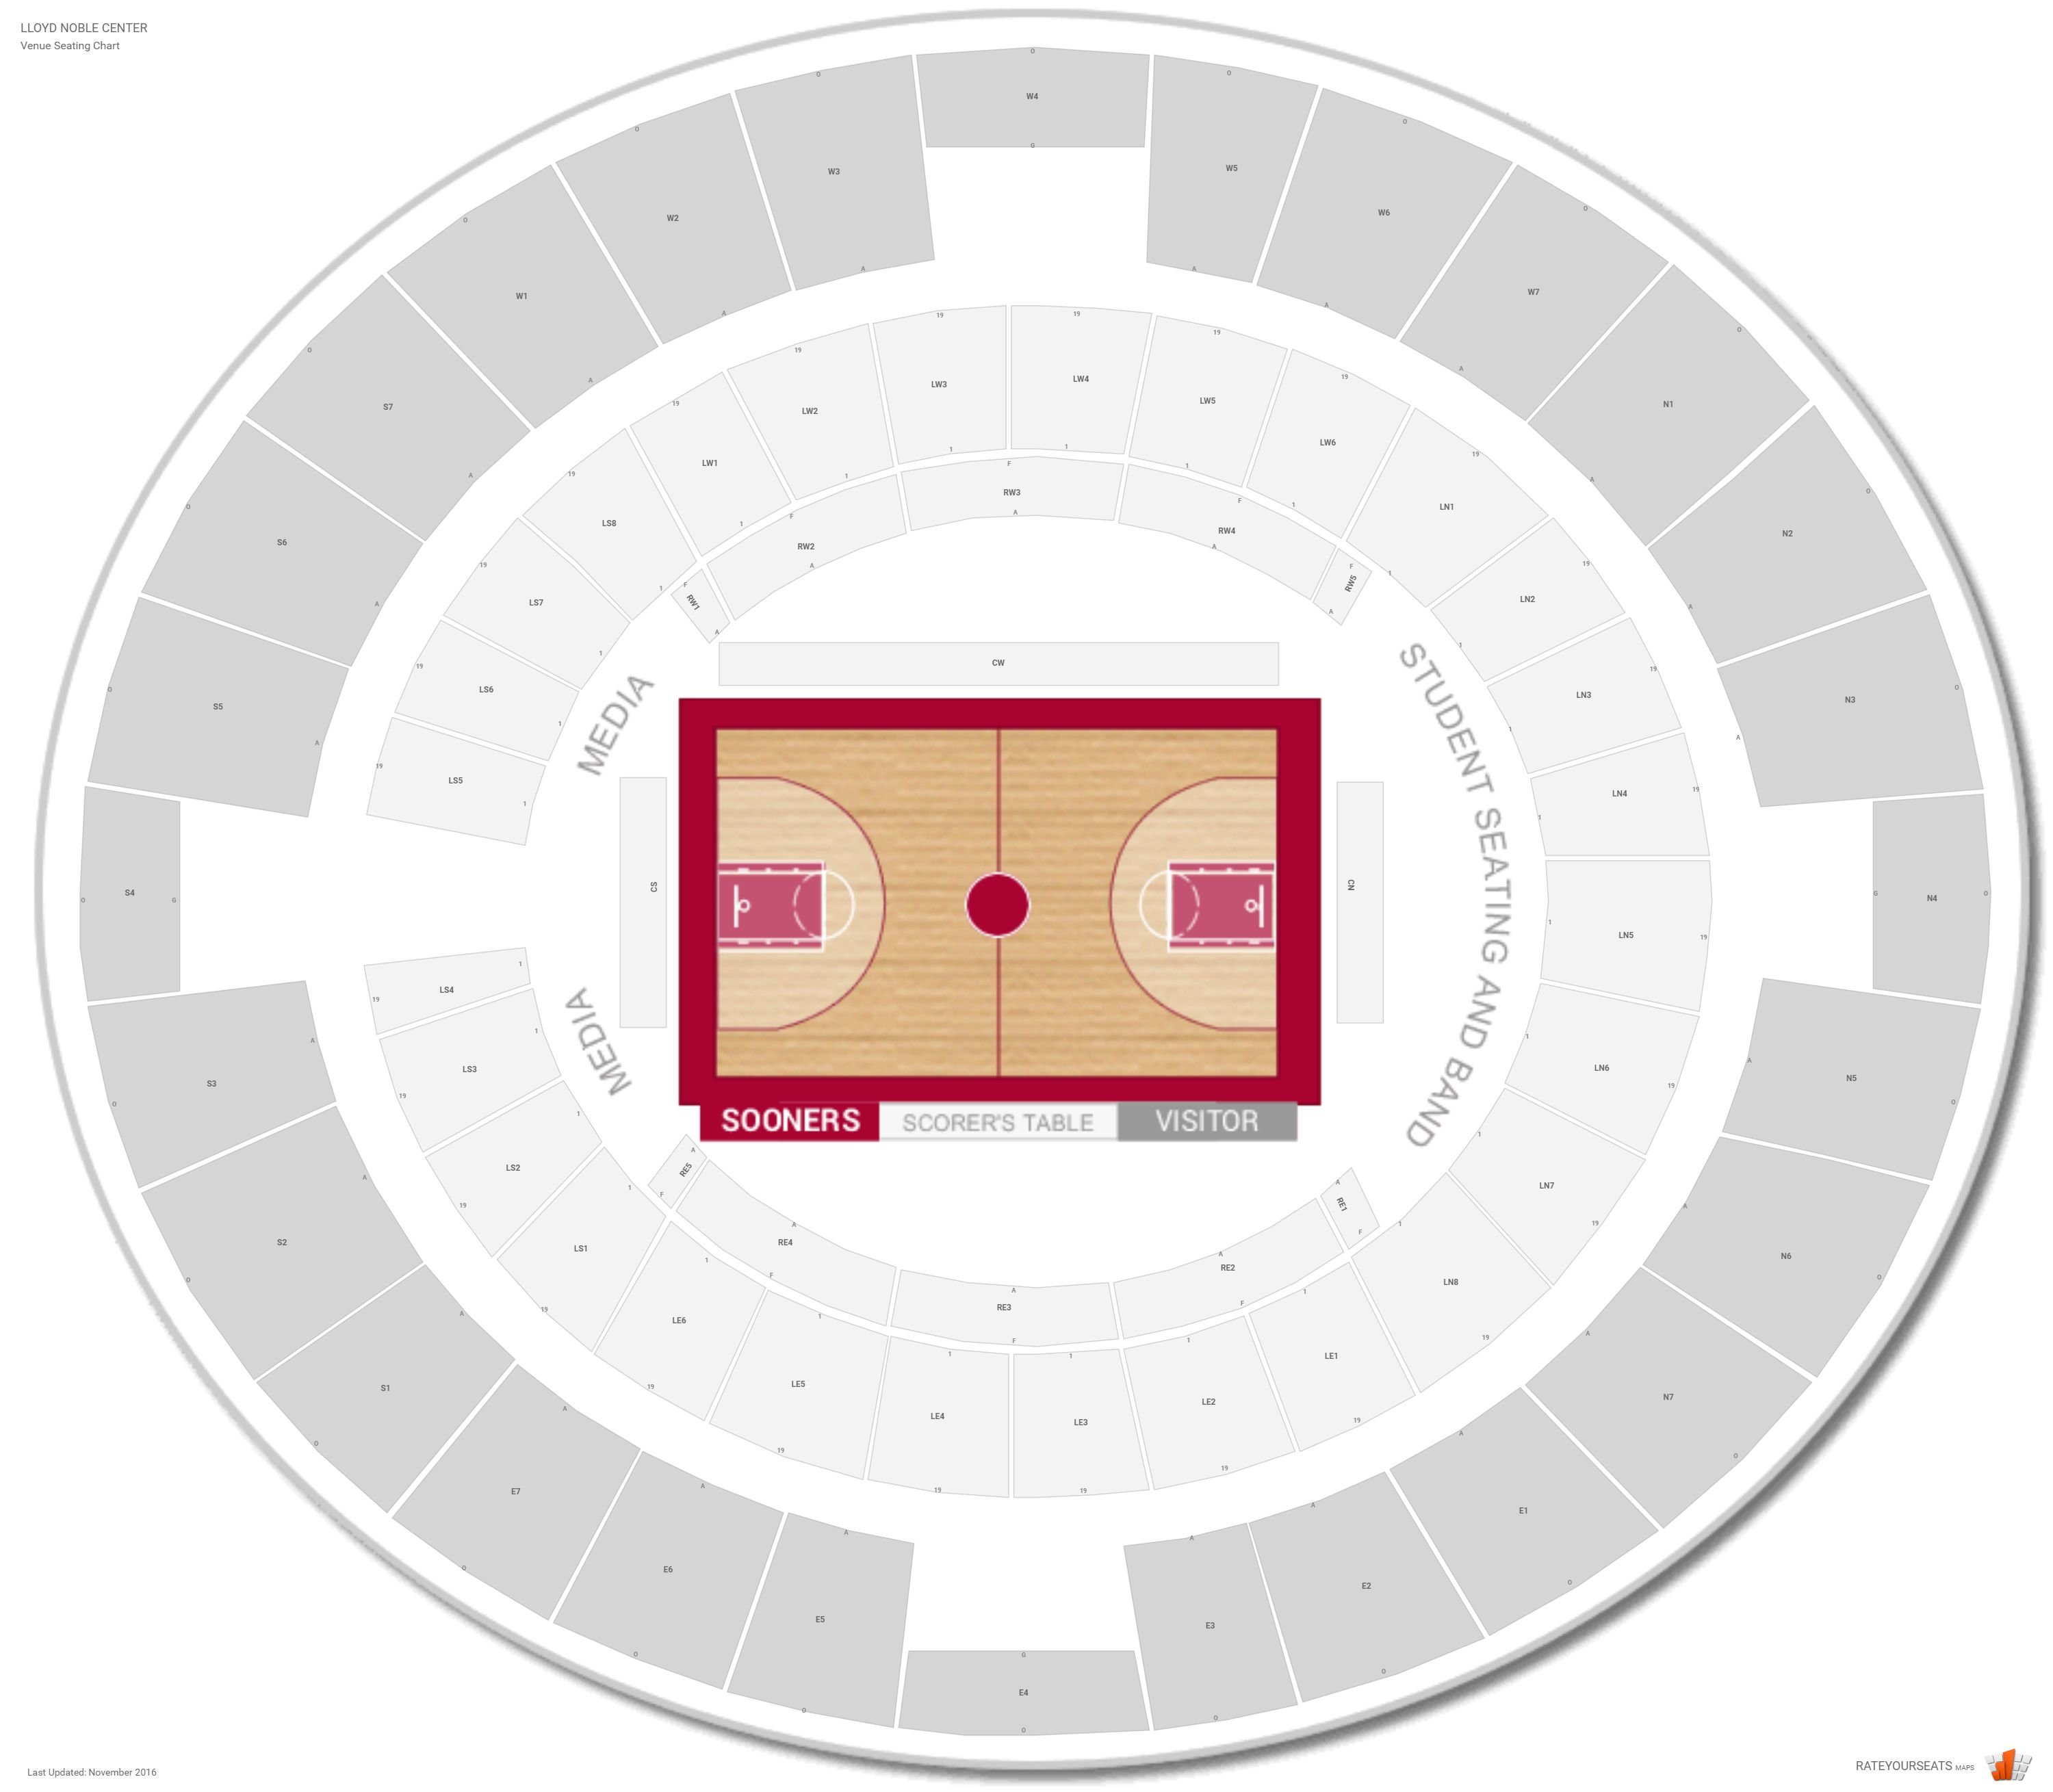 Lakers Seating Chart With Seat Numbers